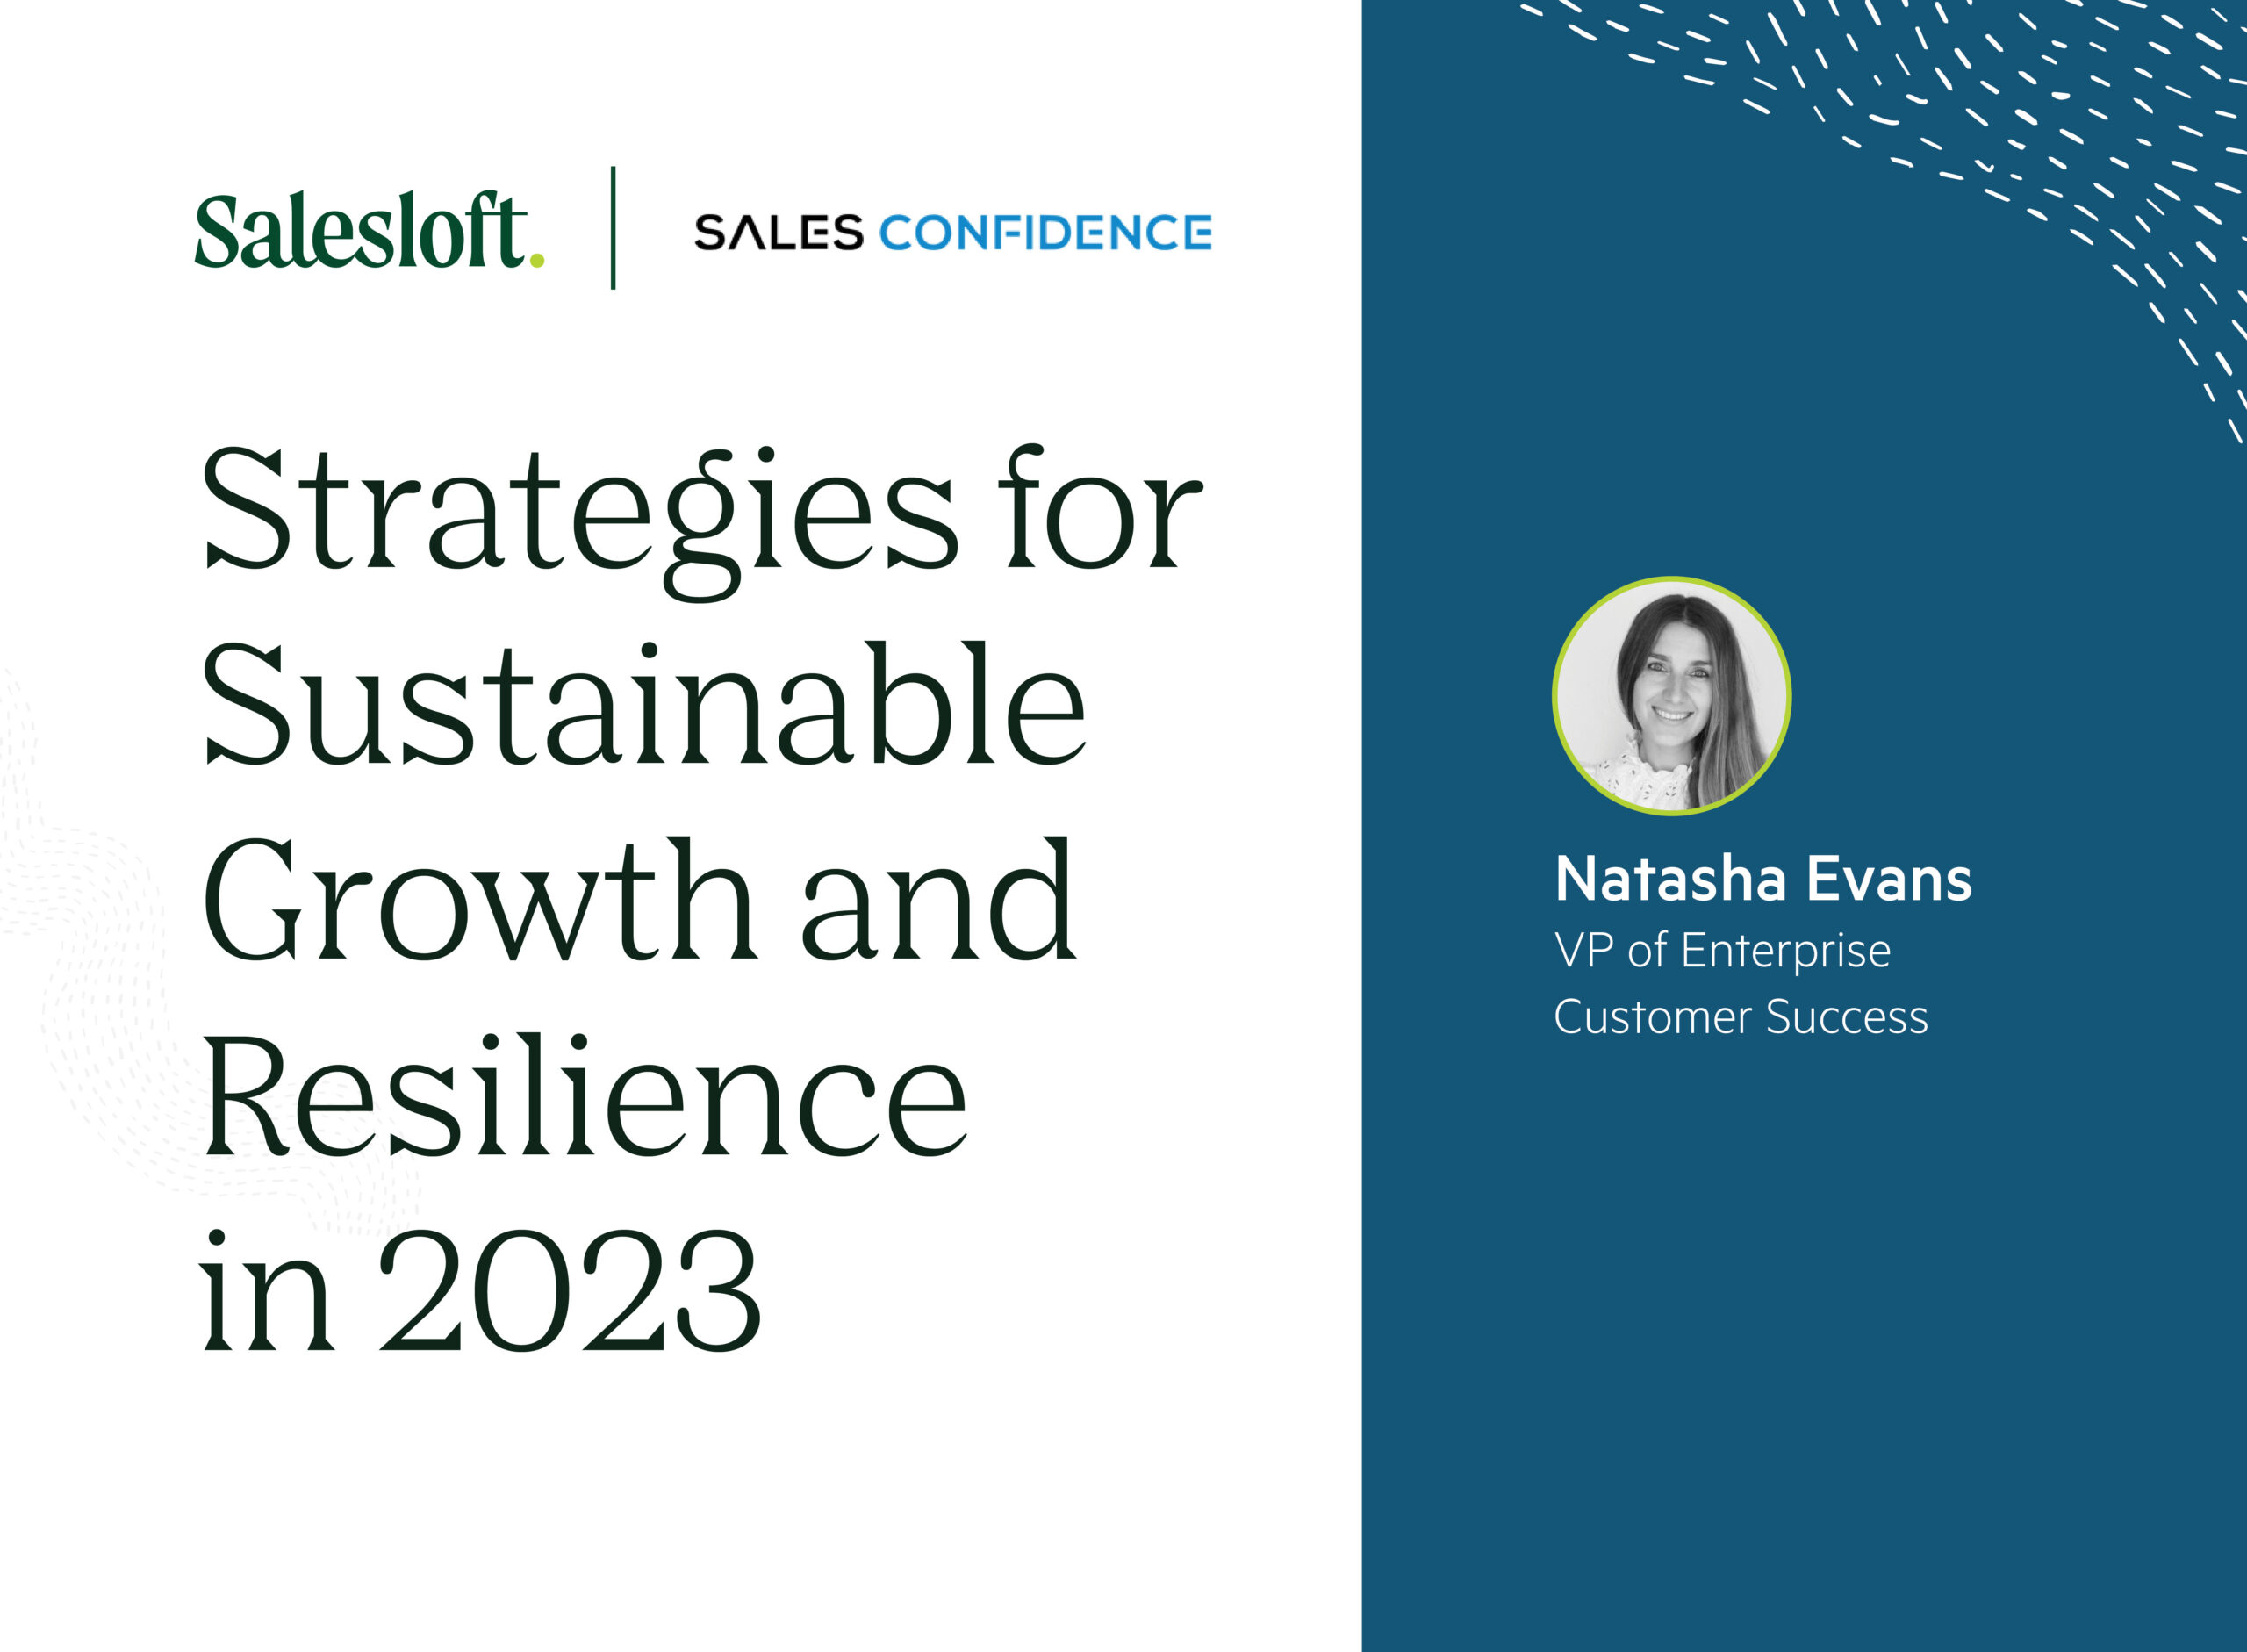 Strategies for Sustainable Growth and Resilience in 2023